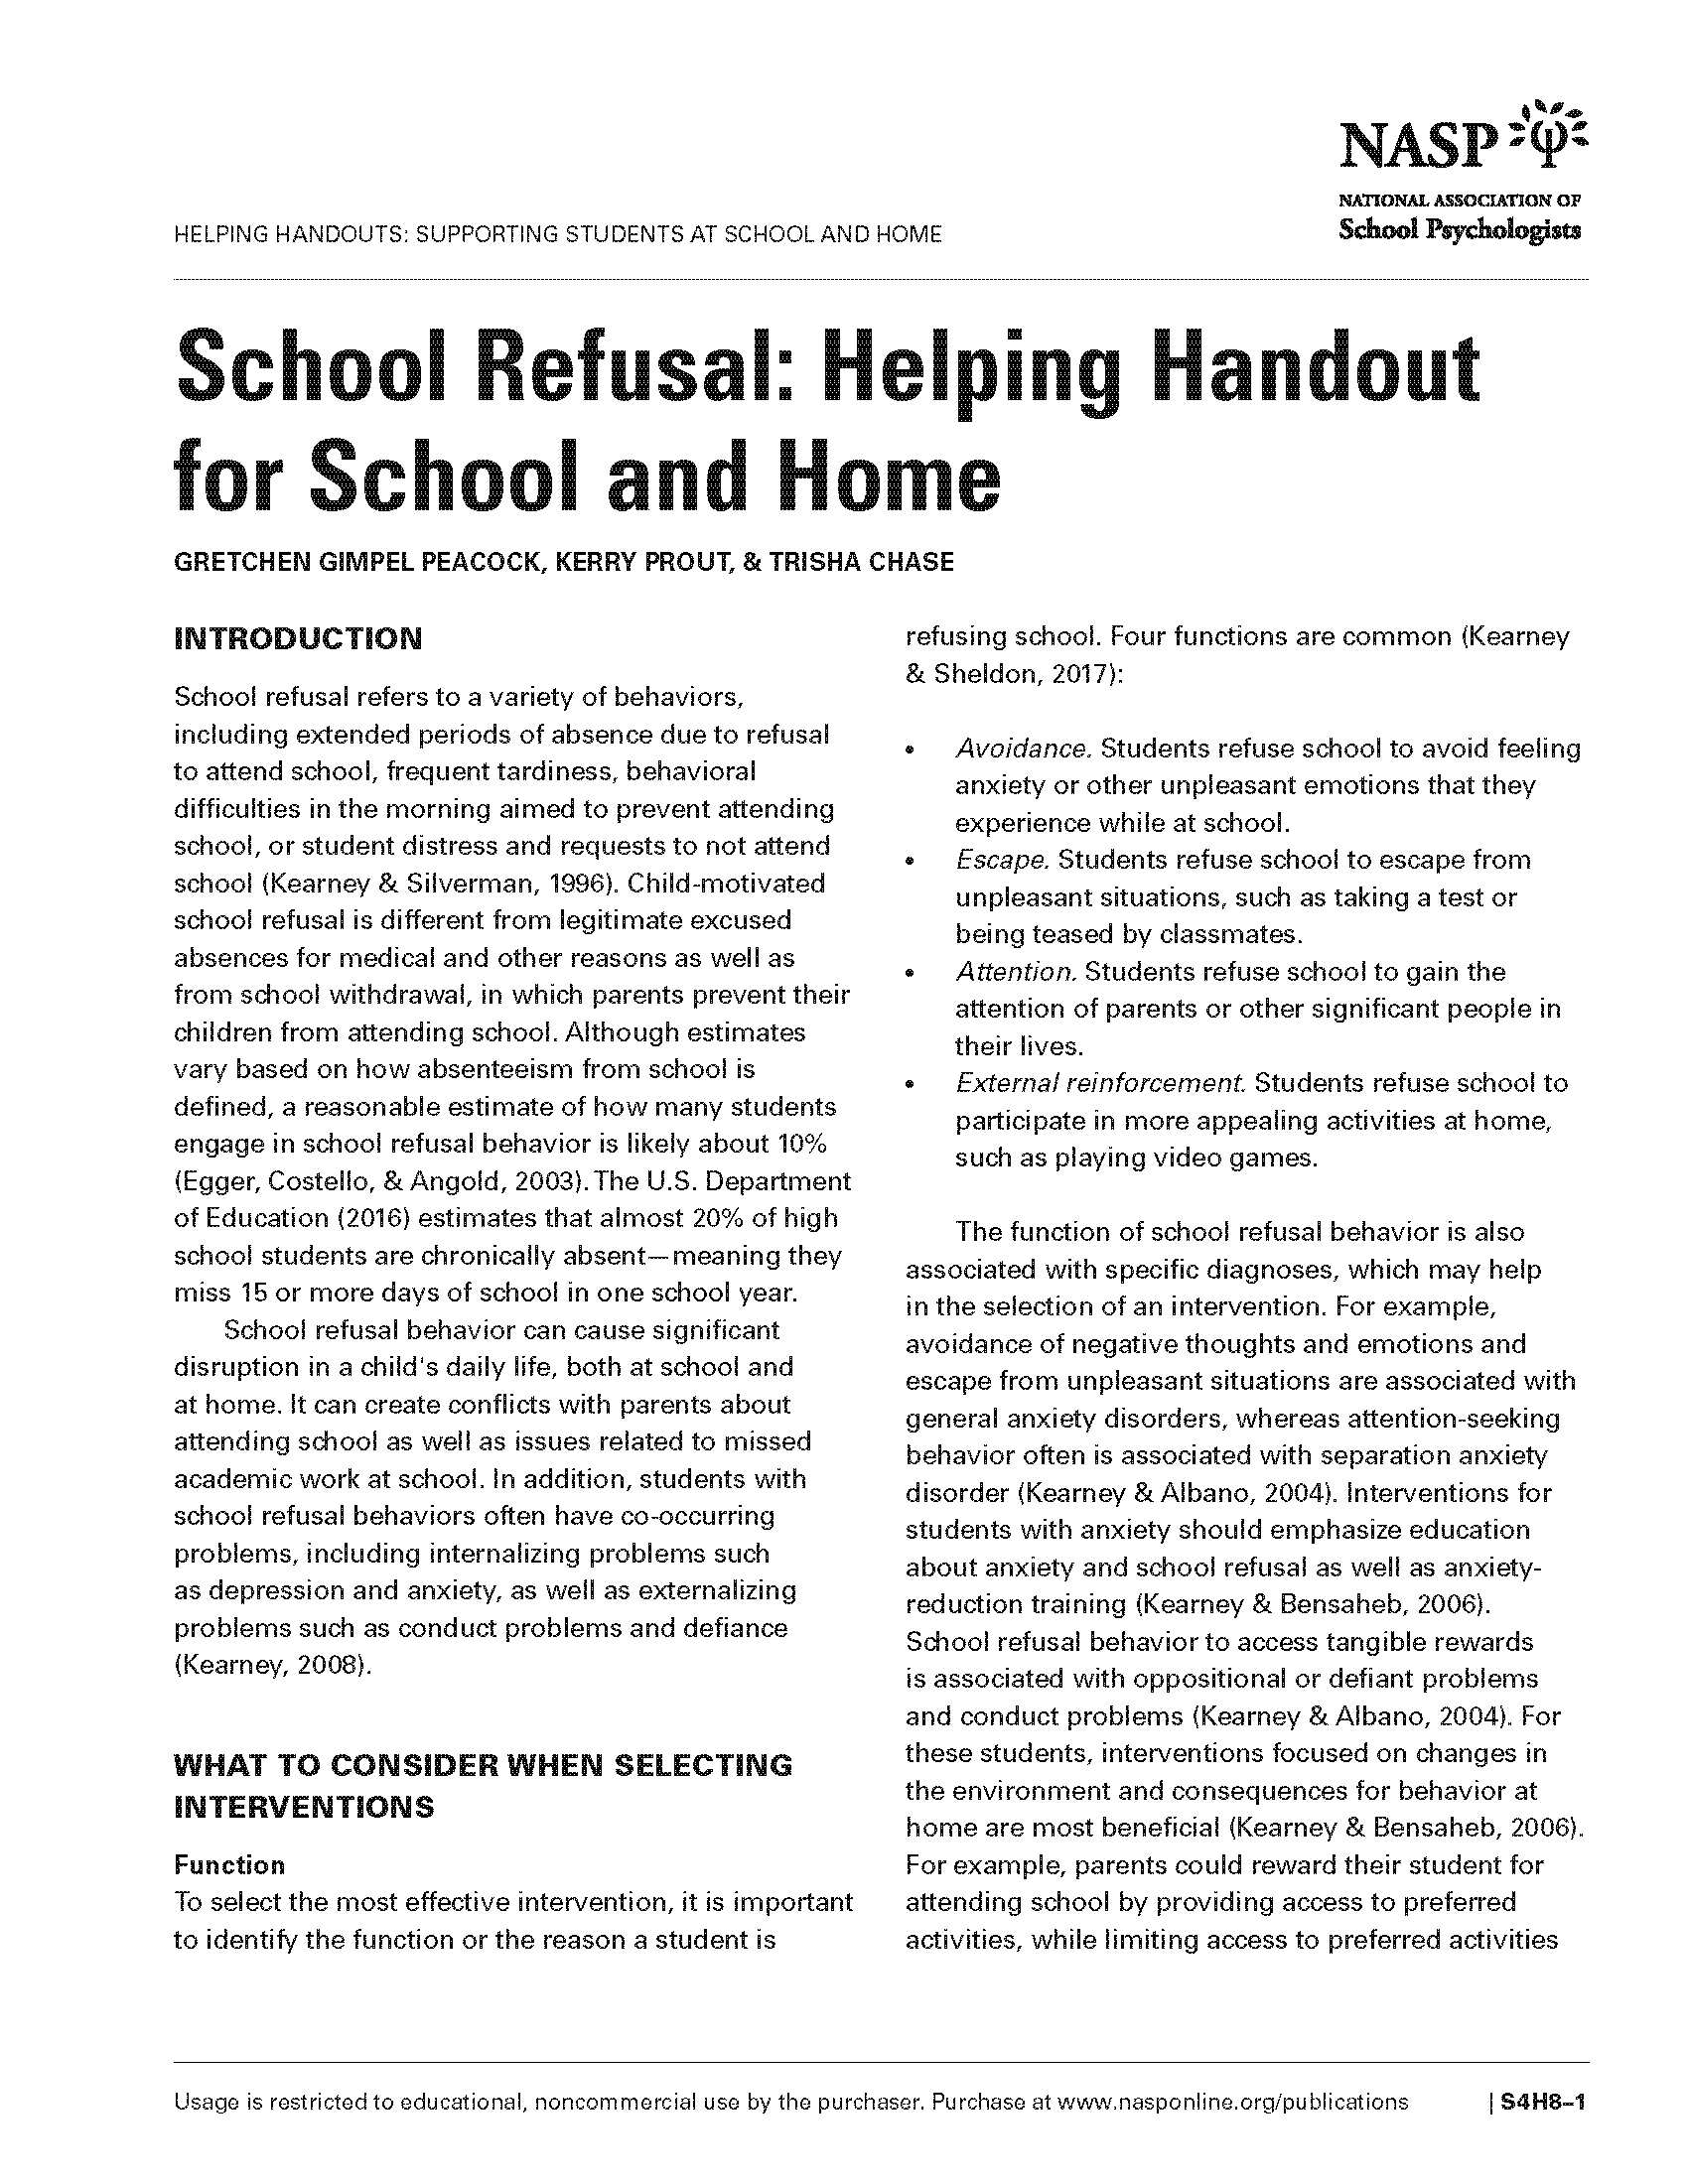 School Refusal: Helping Handout for School and Home